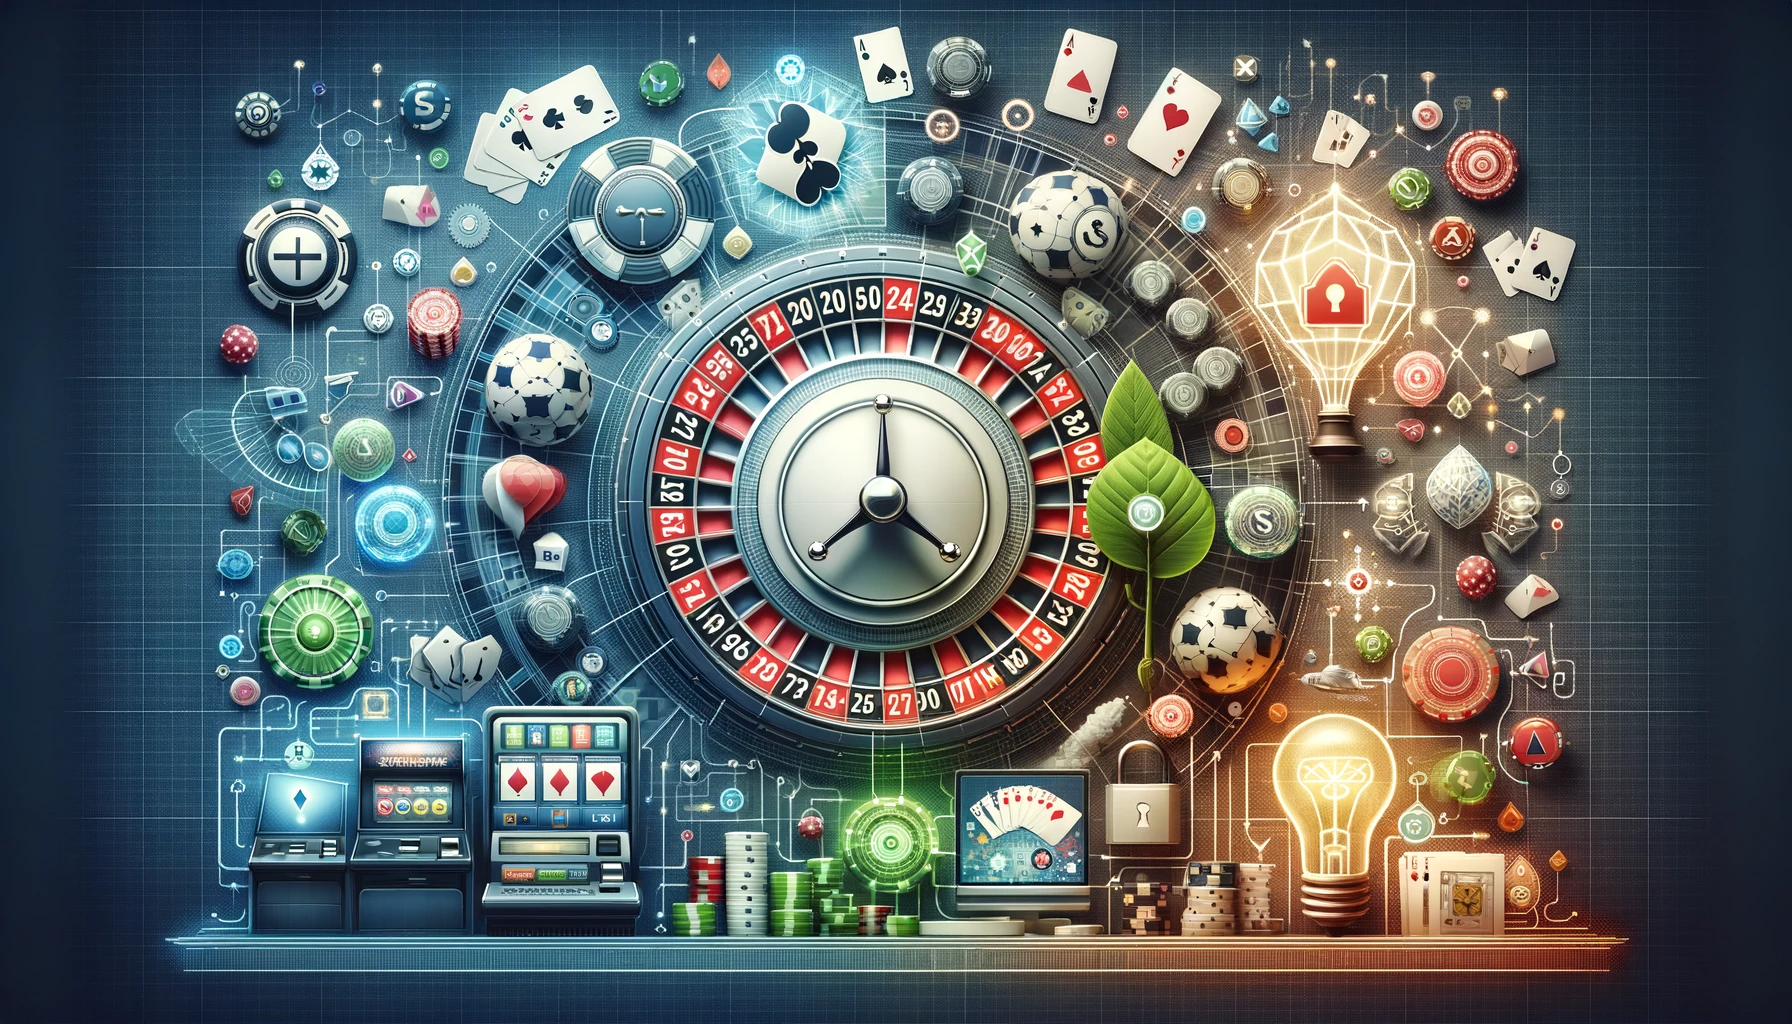 An image combining elements of online casinos, like a digital roulette wheel and slot machines, with symbols of safety and smart decision-making, such as a shield and a light bulb.